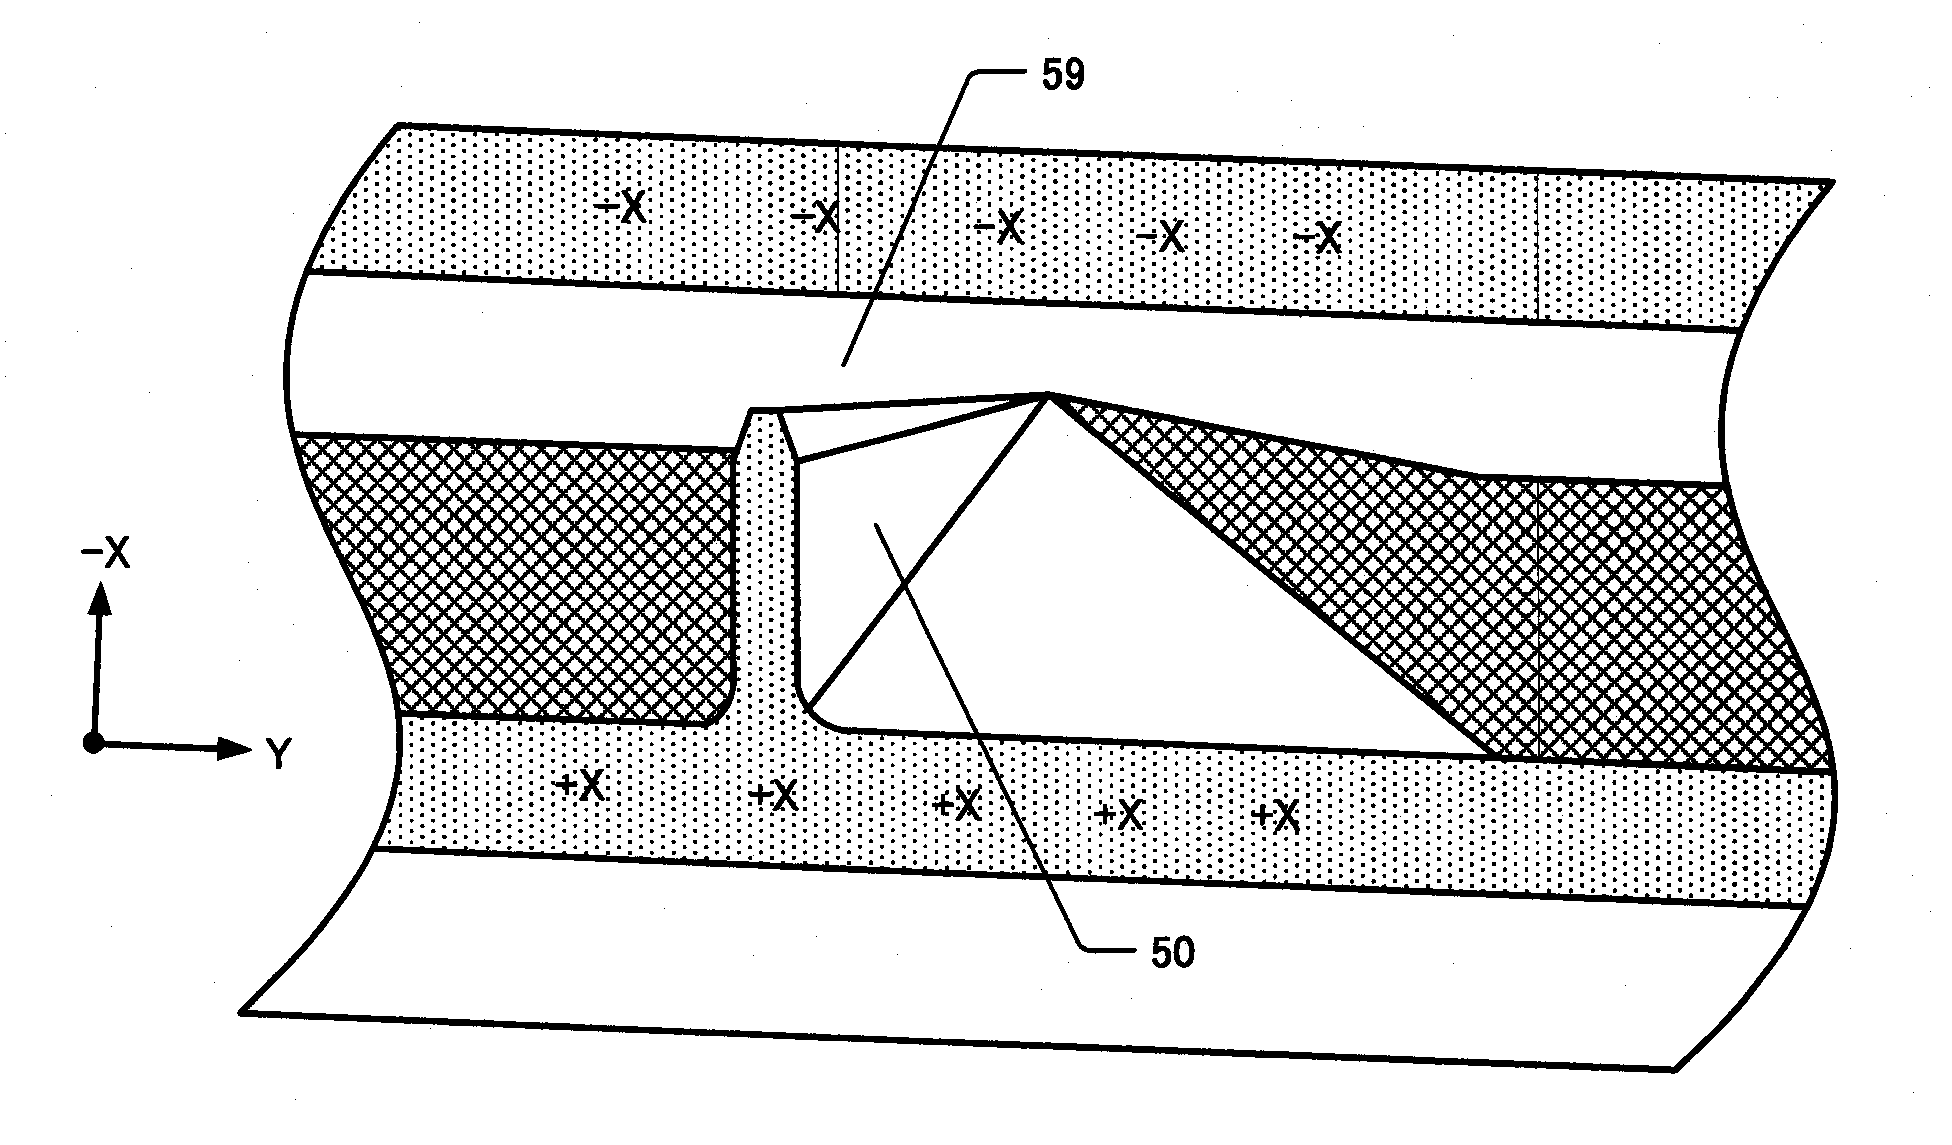 Piezoelectric vibrating pieces, frames, and devices